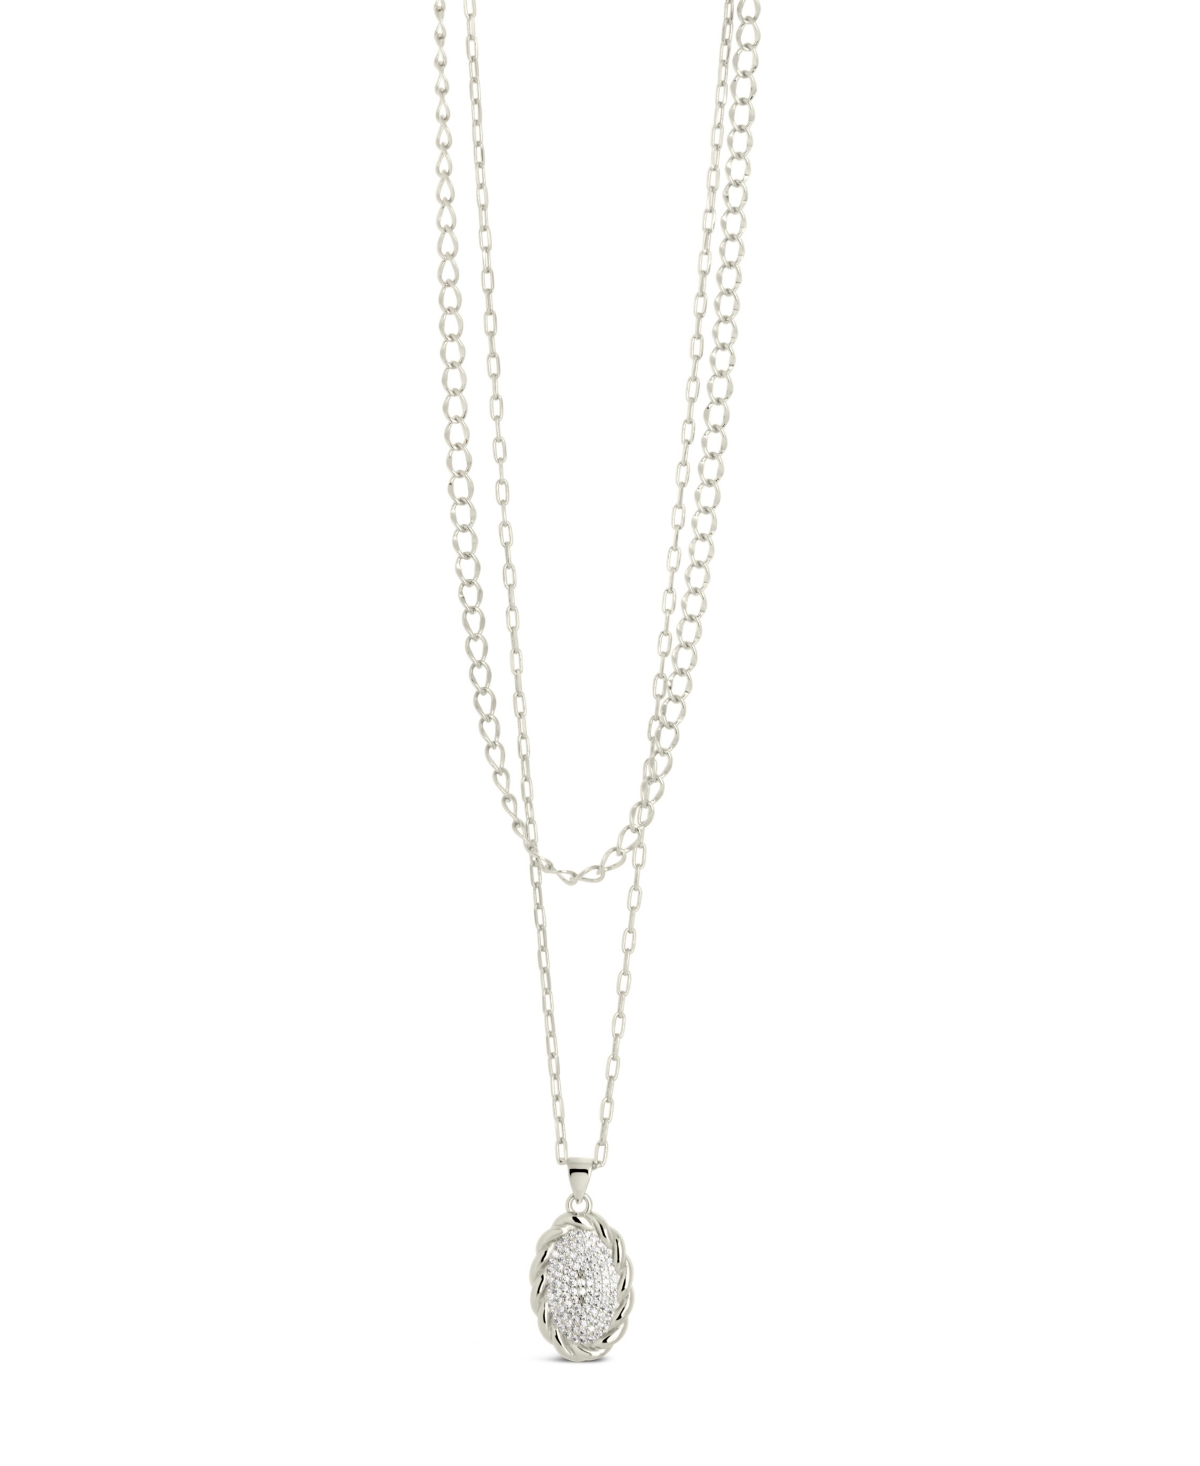 Shop Sterling Forever Silver-tone Or Gold-tone Cubic Zirconia Round Pendant Galette Layered Necklace